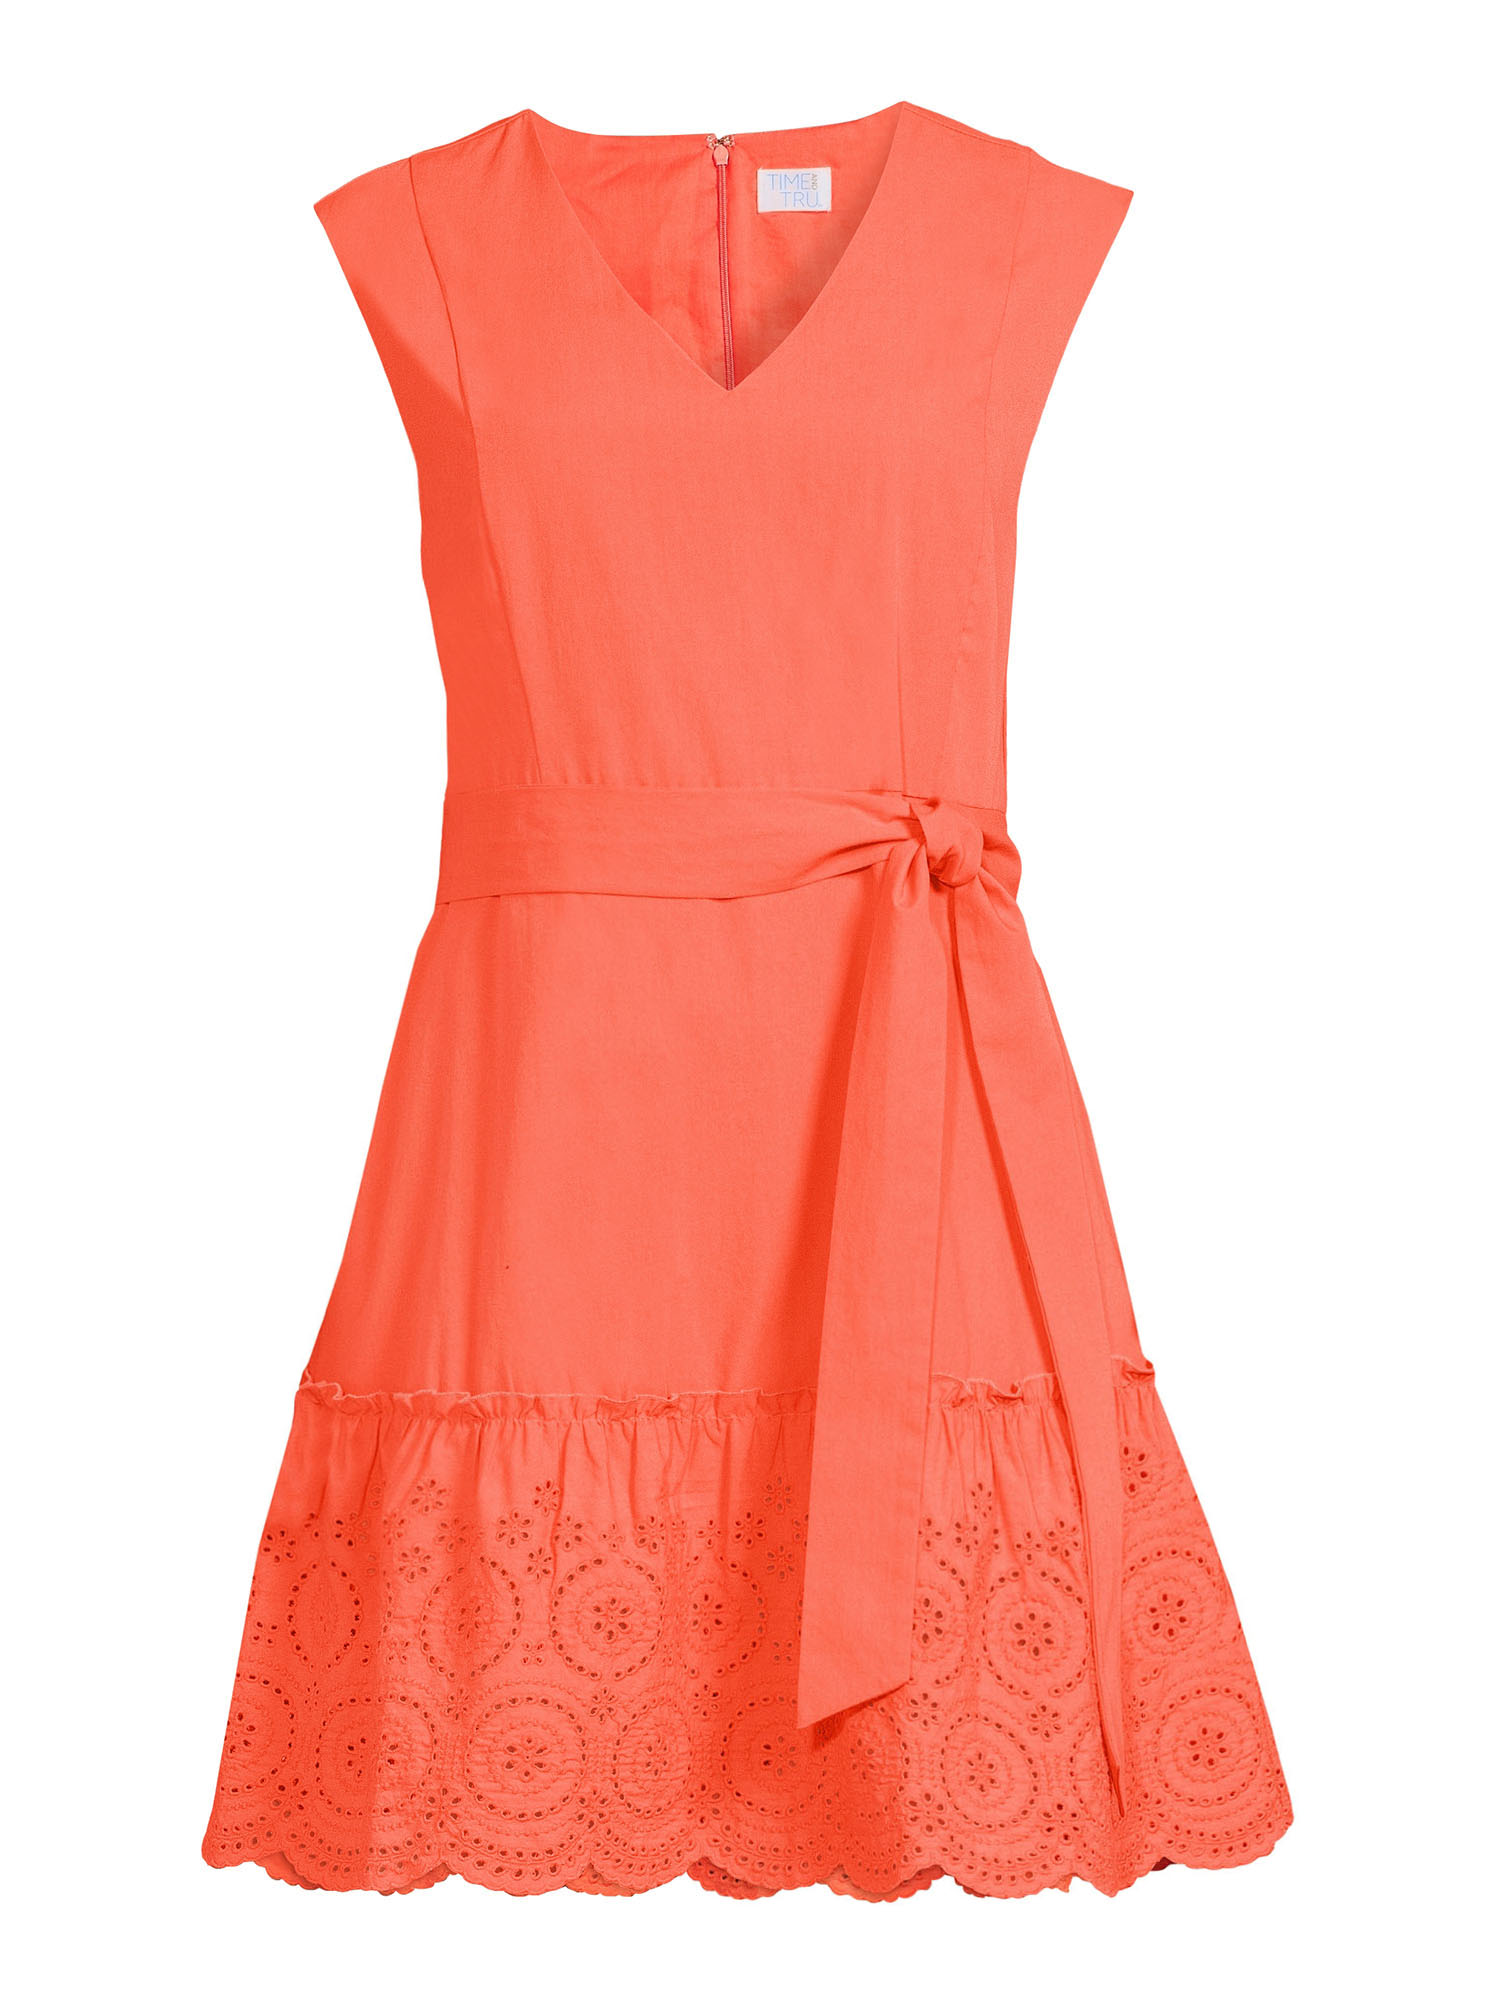 Time and Tru Women's Short Sleeve Eyelet Ruffle Dress with Belt - image 5 of 5